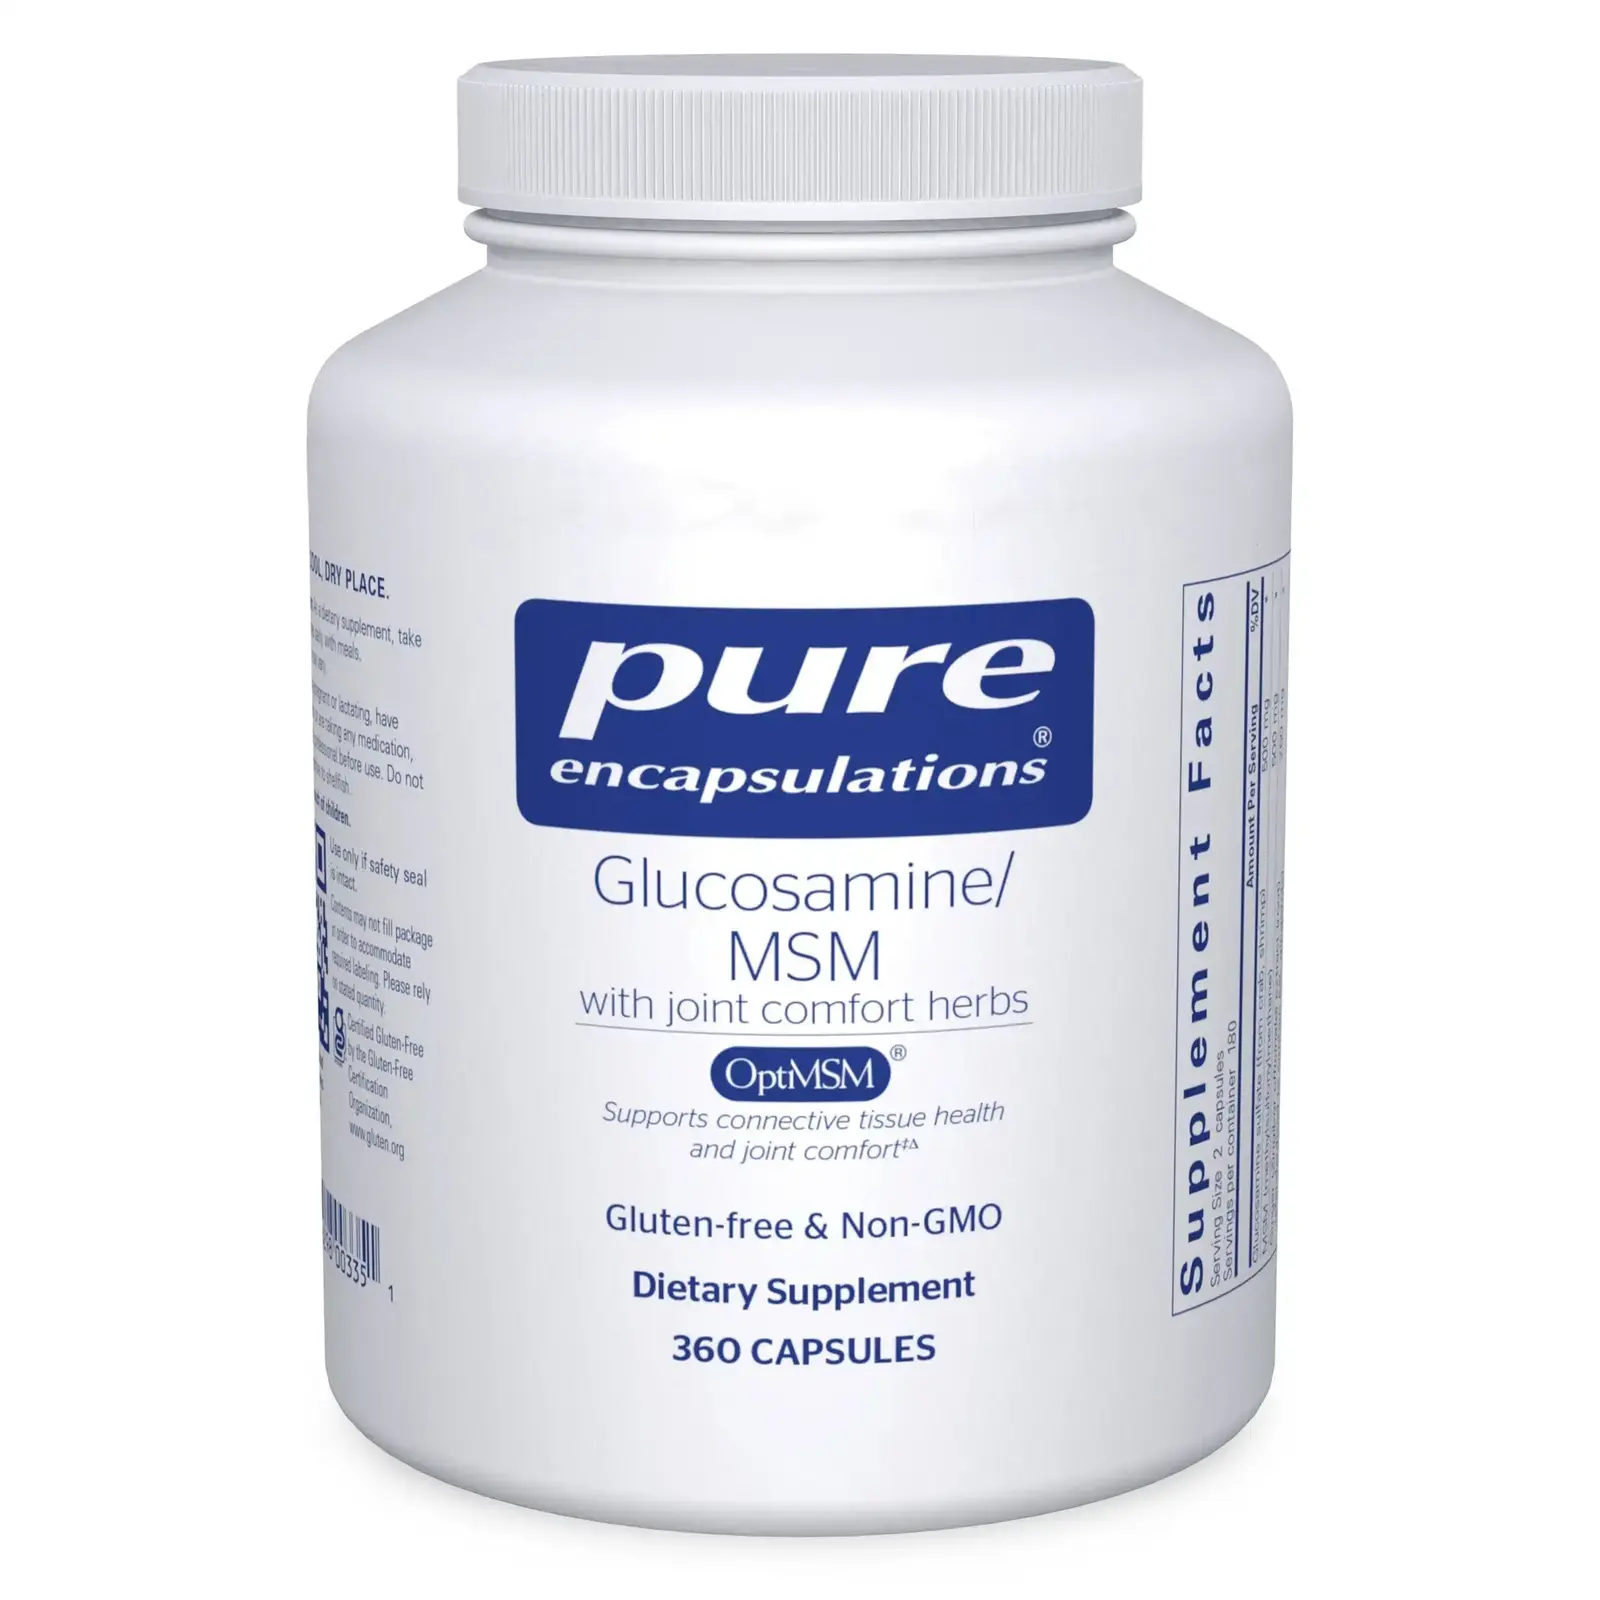 Glucosamine/MSM with joint comfort herbs